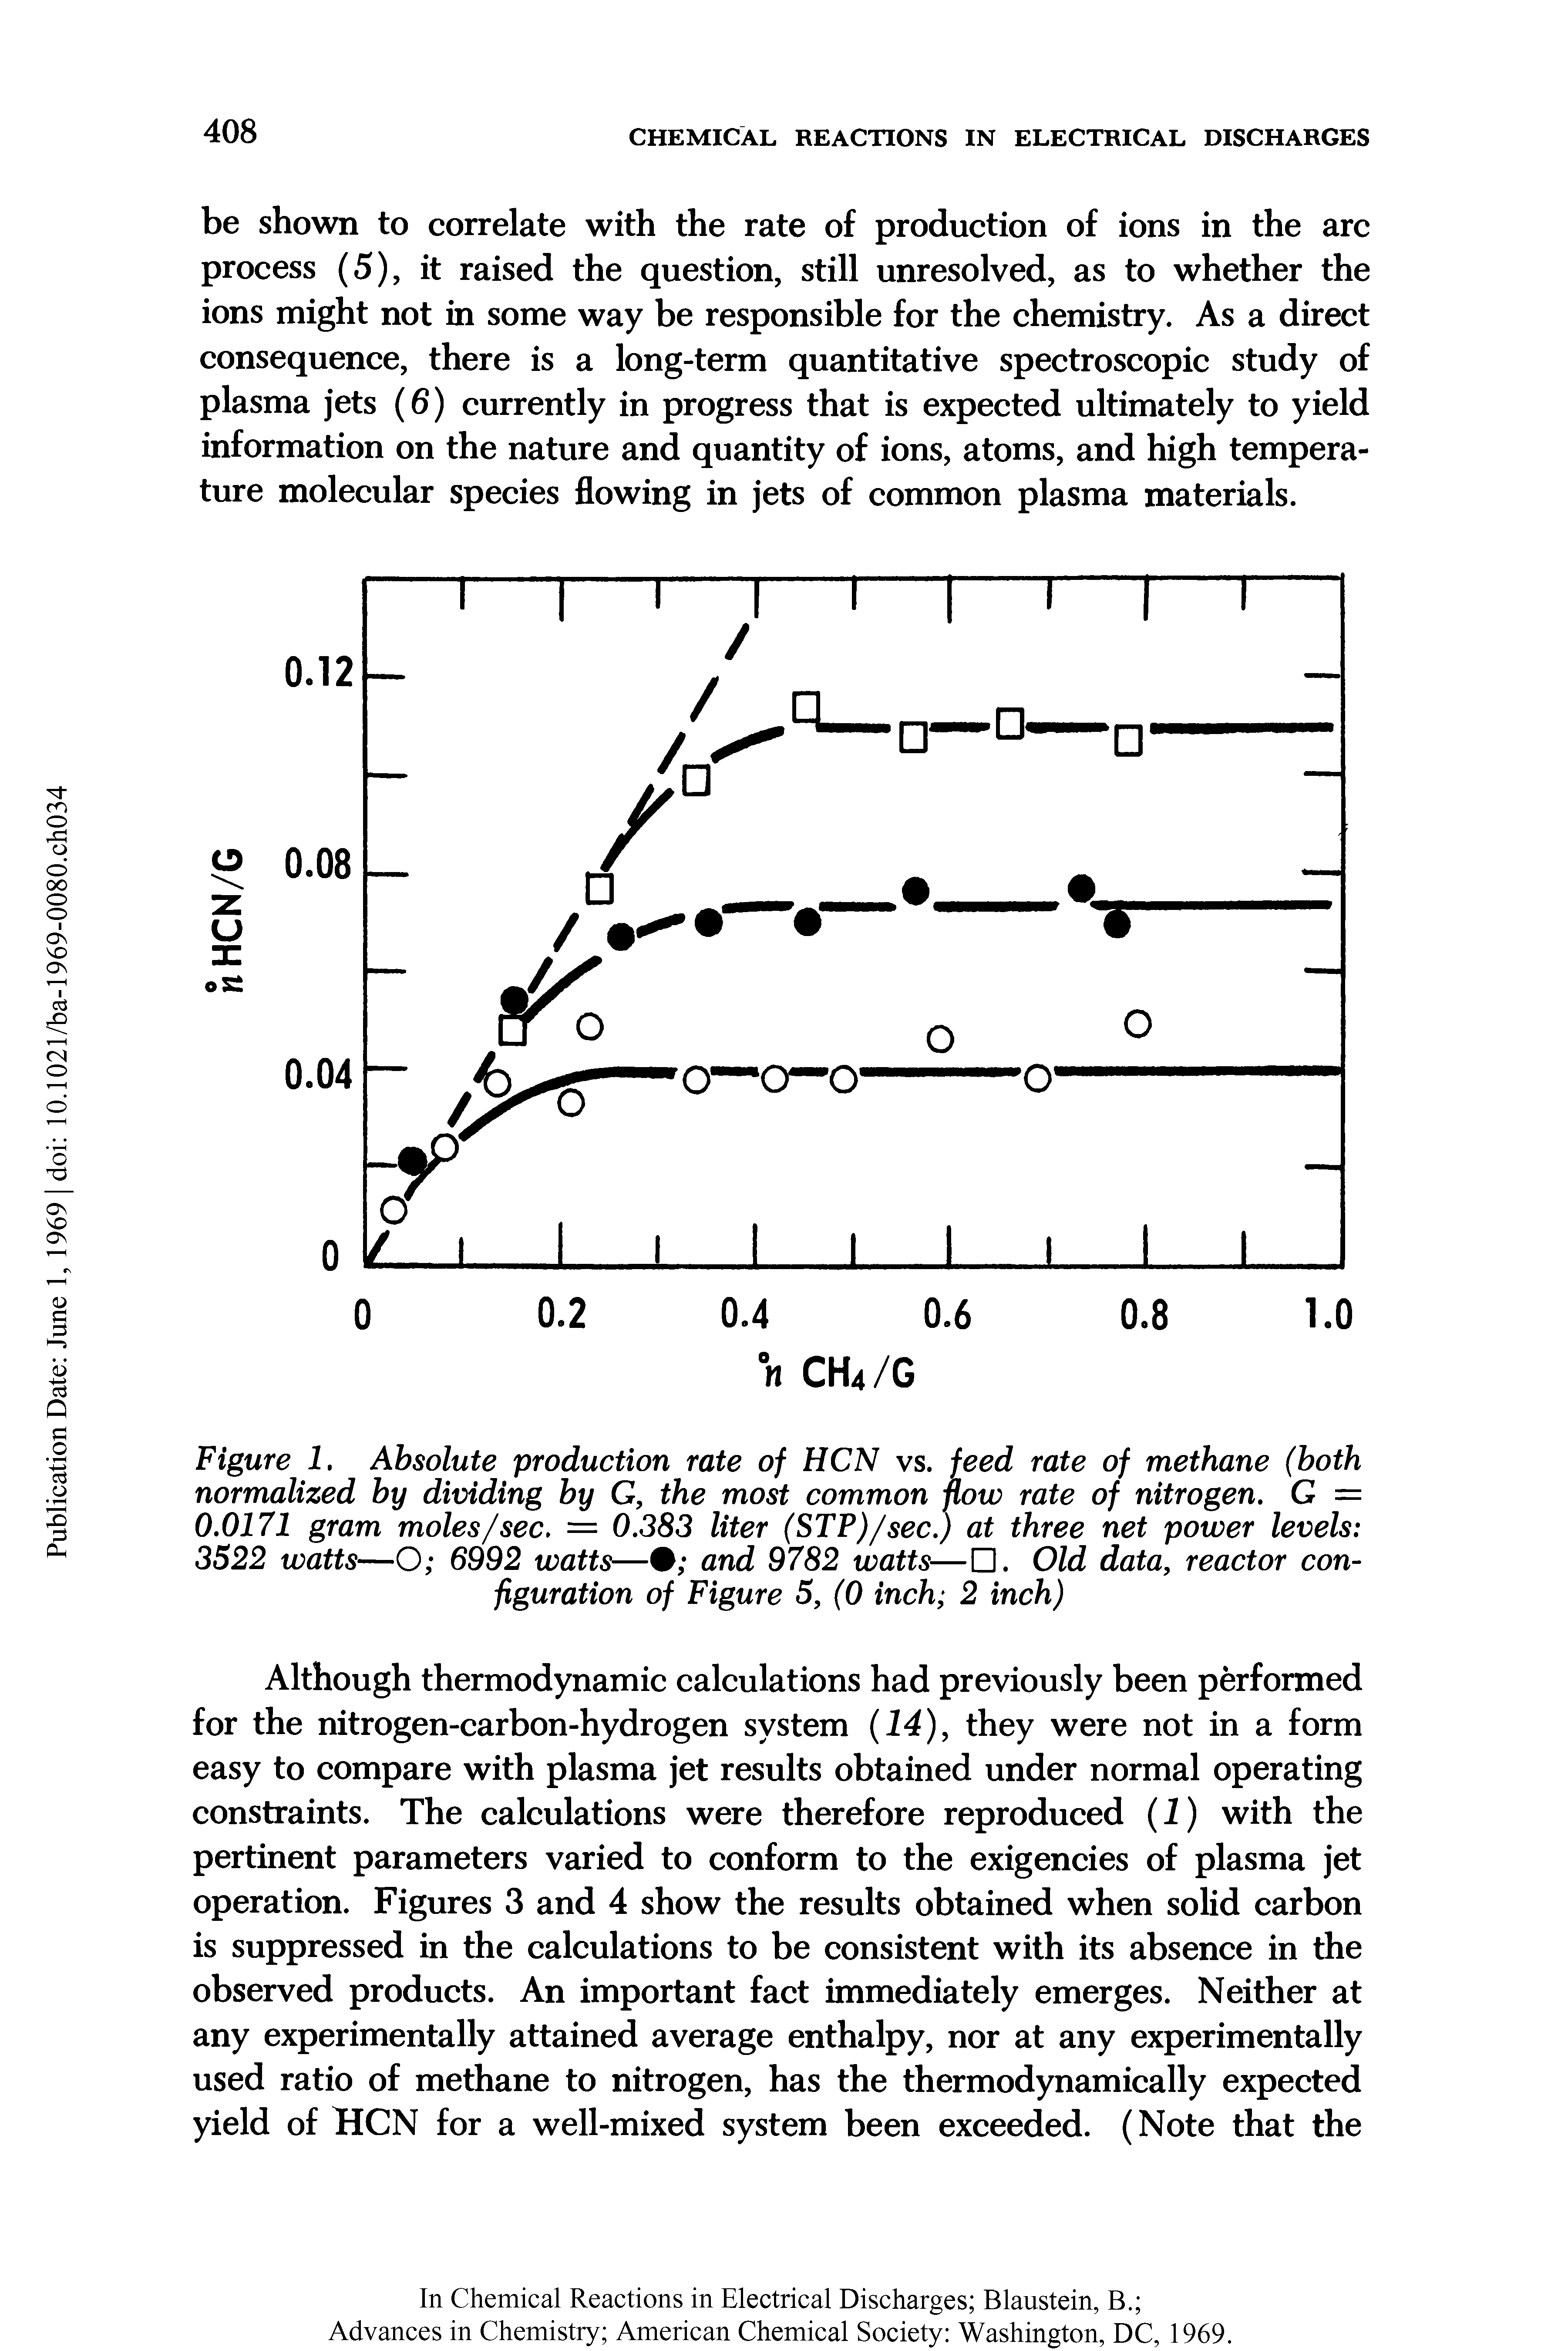 Figure 1. Absolute production rate of HCN vs. feed rate of methane (both normalized by dividing by G, the most common flow rate of nitrogen. G = 0.0171 gram moles/sec. = 0.383 liter (STP)/sec.) at three net power levels 3522 watts—O 6992 watts— and 9782 watts— . Old data, reactor configuration of Figure 5, (0 inch 2 inch)...